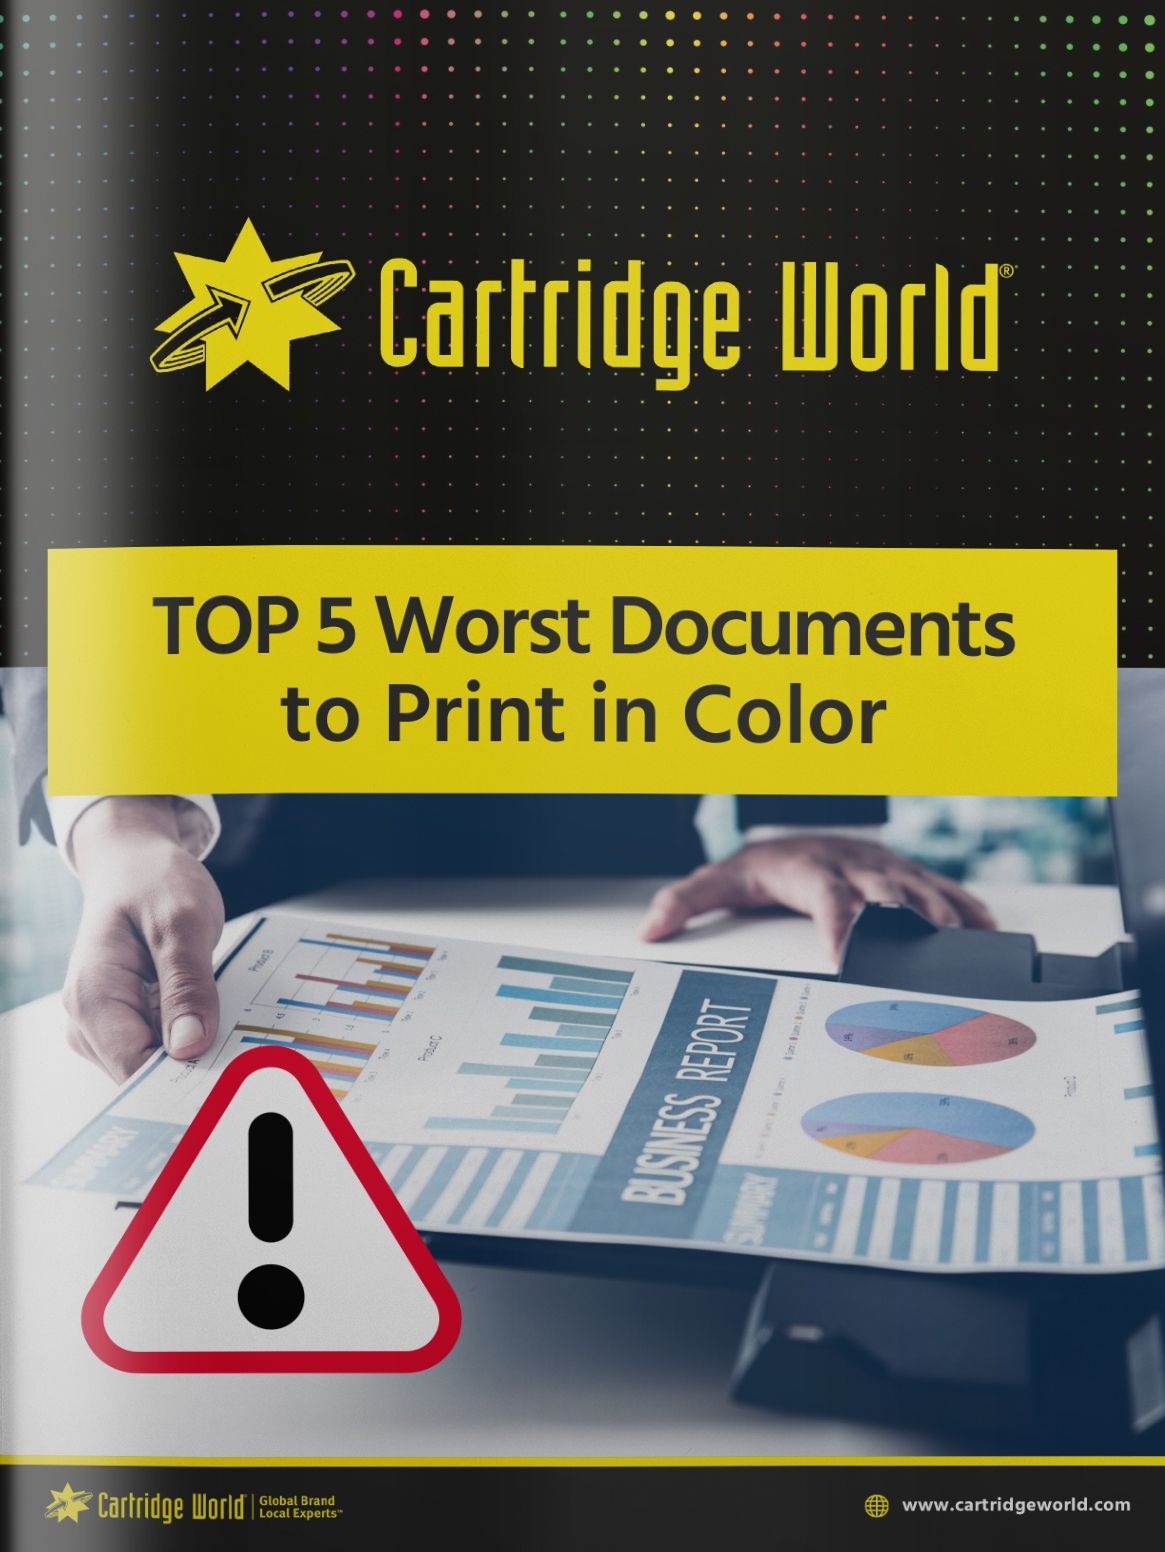 Top 5 Worst Documents to Print in Color